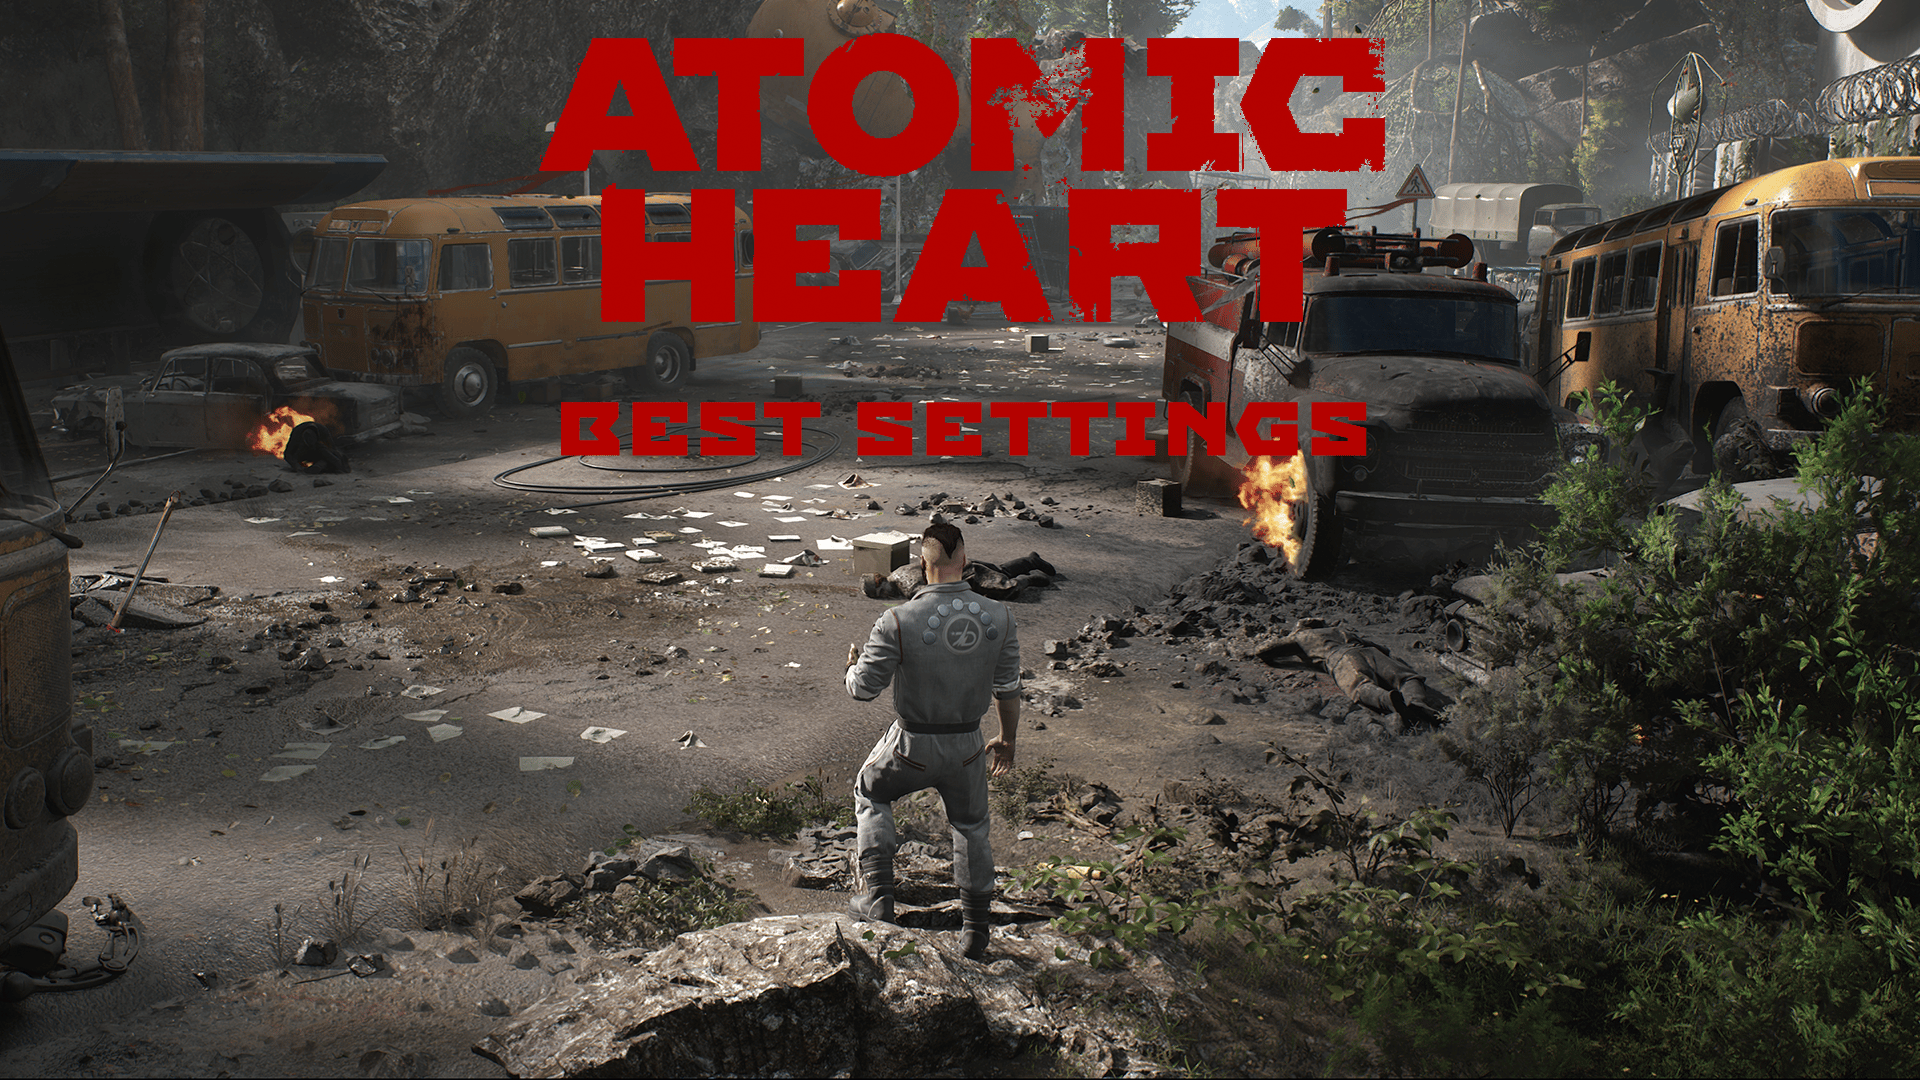  For all your gaming needs - Atomic Heart